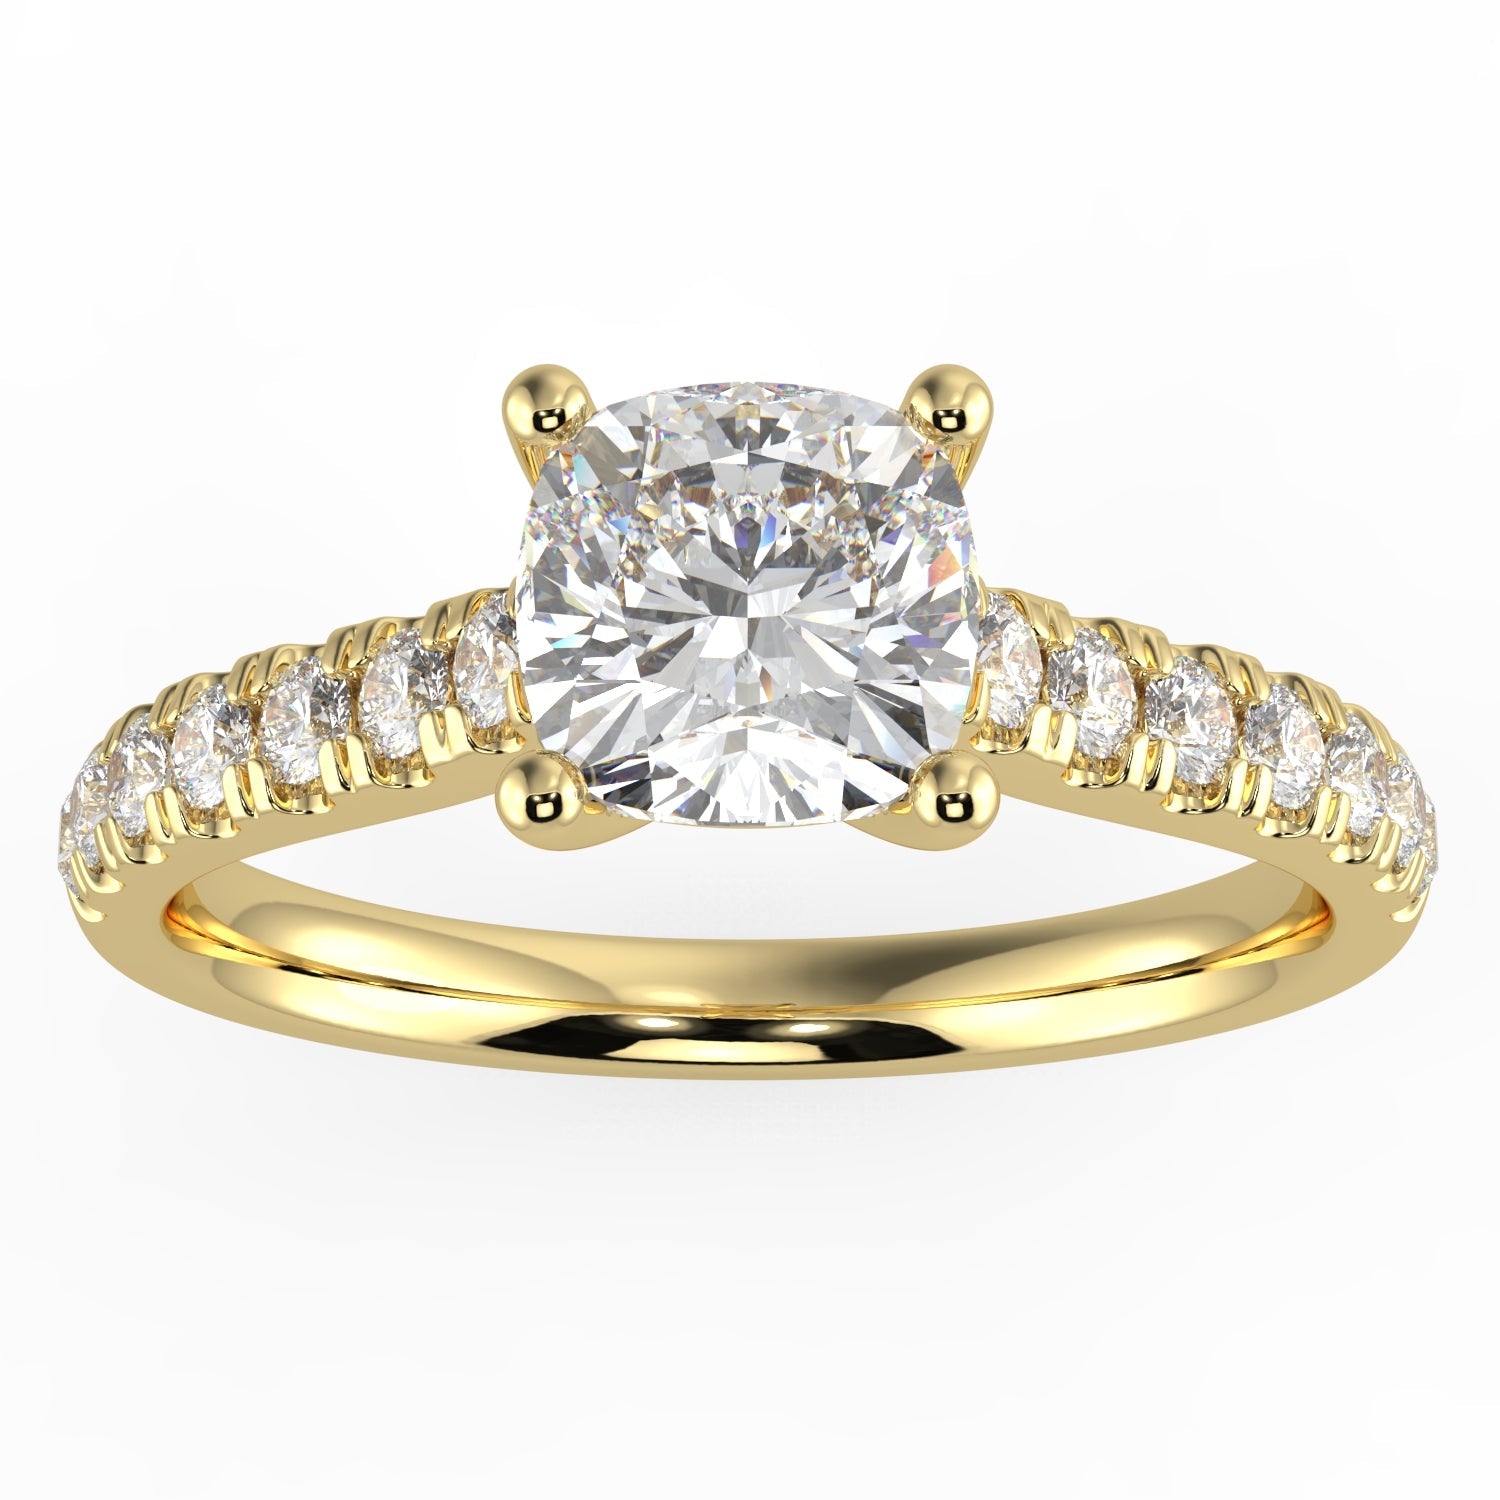 Natural Diamond Slim Shank Ring with 0.70ctw Cushion Shape Center & 0.30 Round Side GHI1 Stones Set on 14K Gold